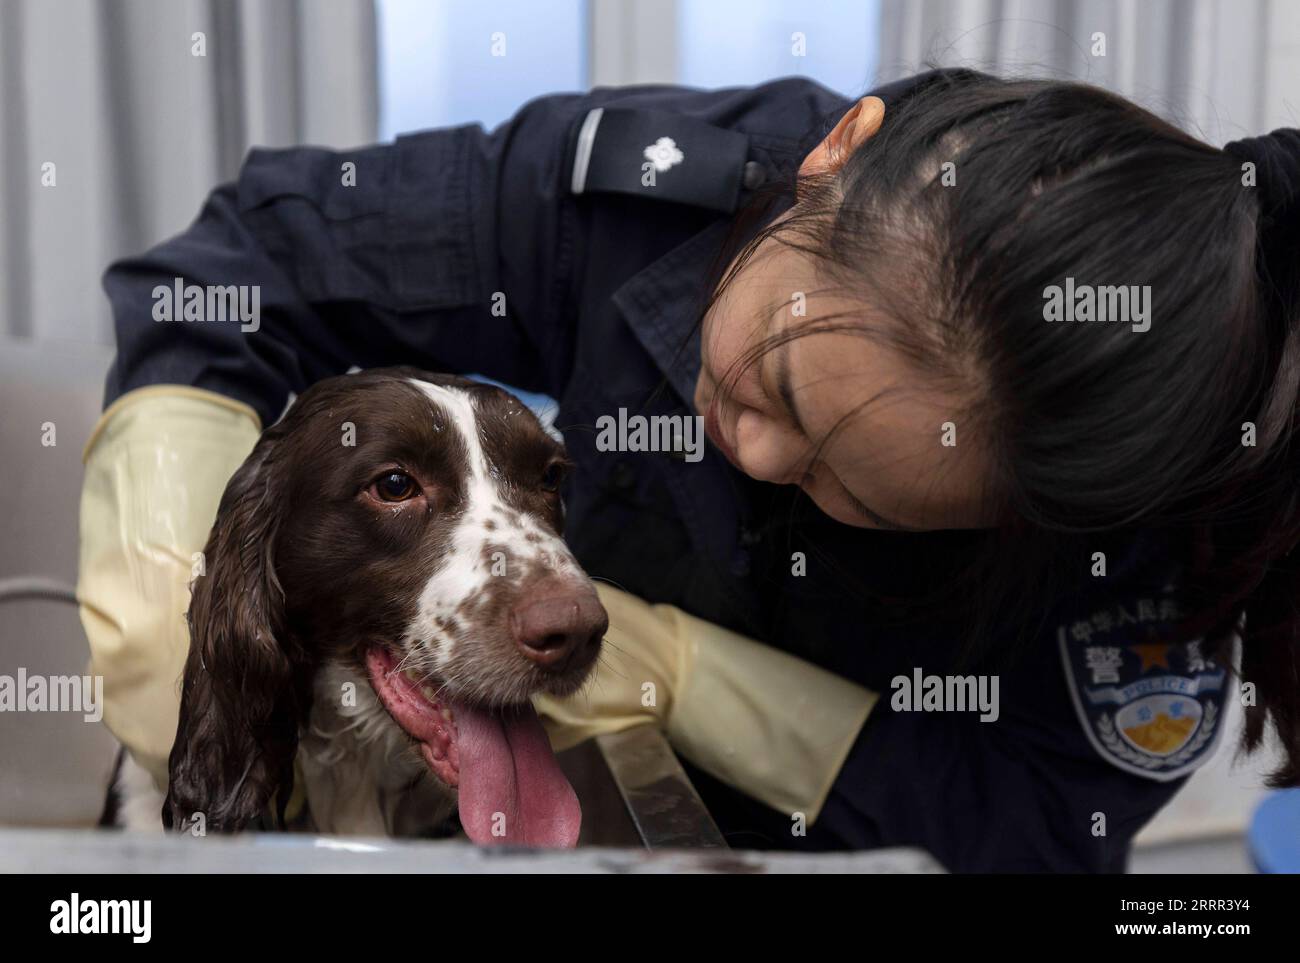 230501 -- ALATAW PASS, May 1, 2023 -- Liu Xin washes police dog Kang Xin at Alataw Pass, northwest China s Xinjiang Uygur Autonomous Region, April 3, 2023. Alataw Pass is a major land port at the China-Kazakhstan border in northwest China s Xinjiang Uygur Autonomous Region. Cui Hongwu, an official with the border inspection station at the port, has been working for over 10 years. Here he met his wife Liu Xin, who is his colleague and works as a police dog handler. In recent years, the Alataw Pass has seen a growing number and accelerating frequency of inbound and outbound train trips, which me Stock Photo